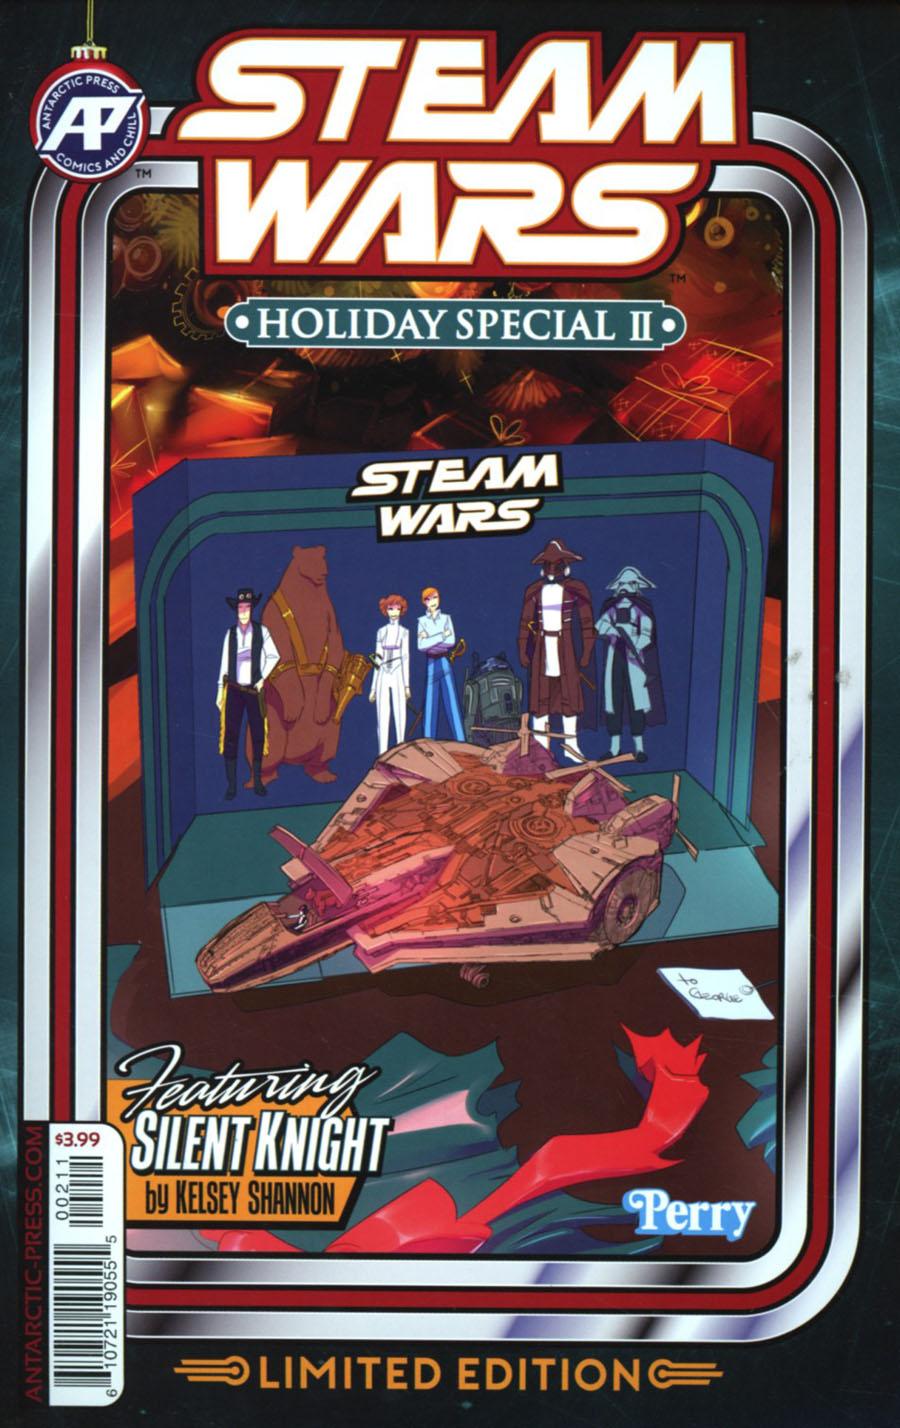 Steam Wars Holiday Special Vol. 1 #2